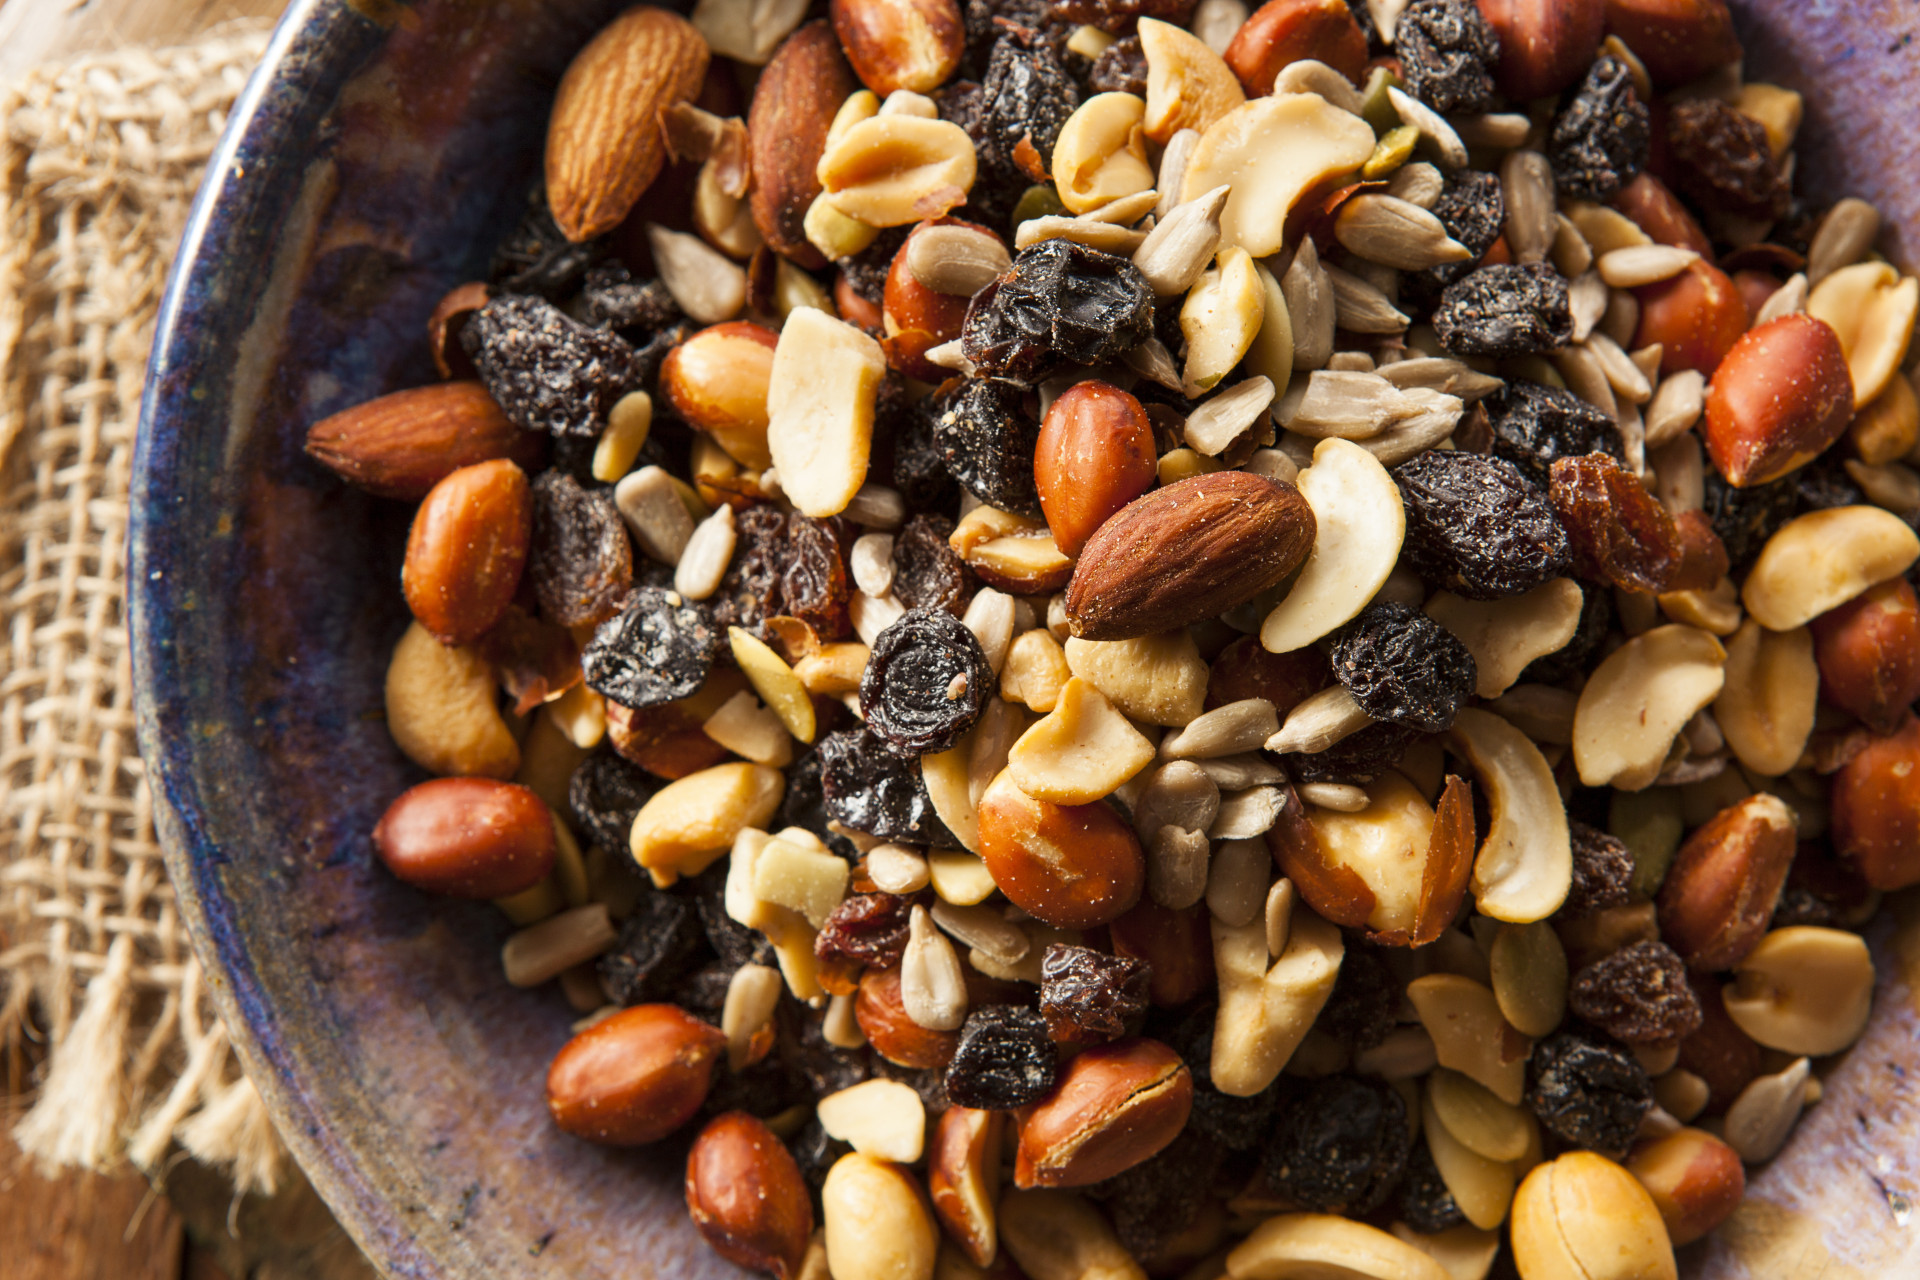 Trail mix is a great source of fiber and protein to keep you feeling full. Plus, you can customize it to your liking. Try macadamia nuts, white chocolate, and dried bananas for something indulgent.<p>You may also like:<a href="https://www.starsinsider.com/n/484338?utm_source=msn.com&utm_medium=display&utm_campaign=referral_description&utm_content=356024v3en-us"> Discover the strangest patron saints in history</a></p>